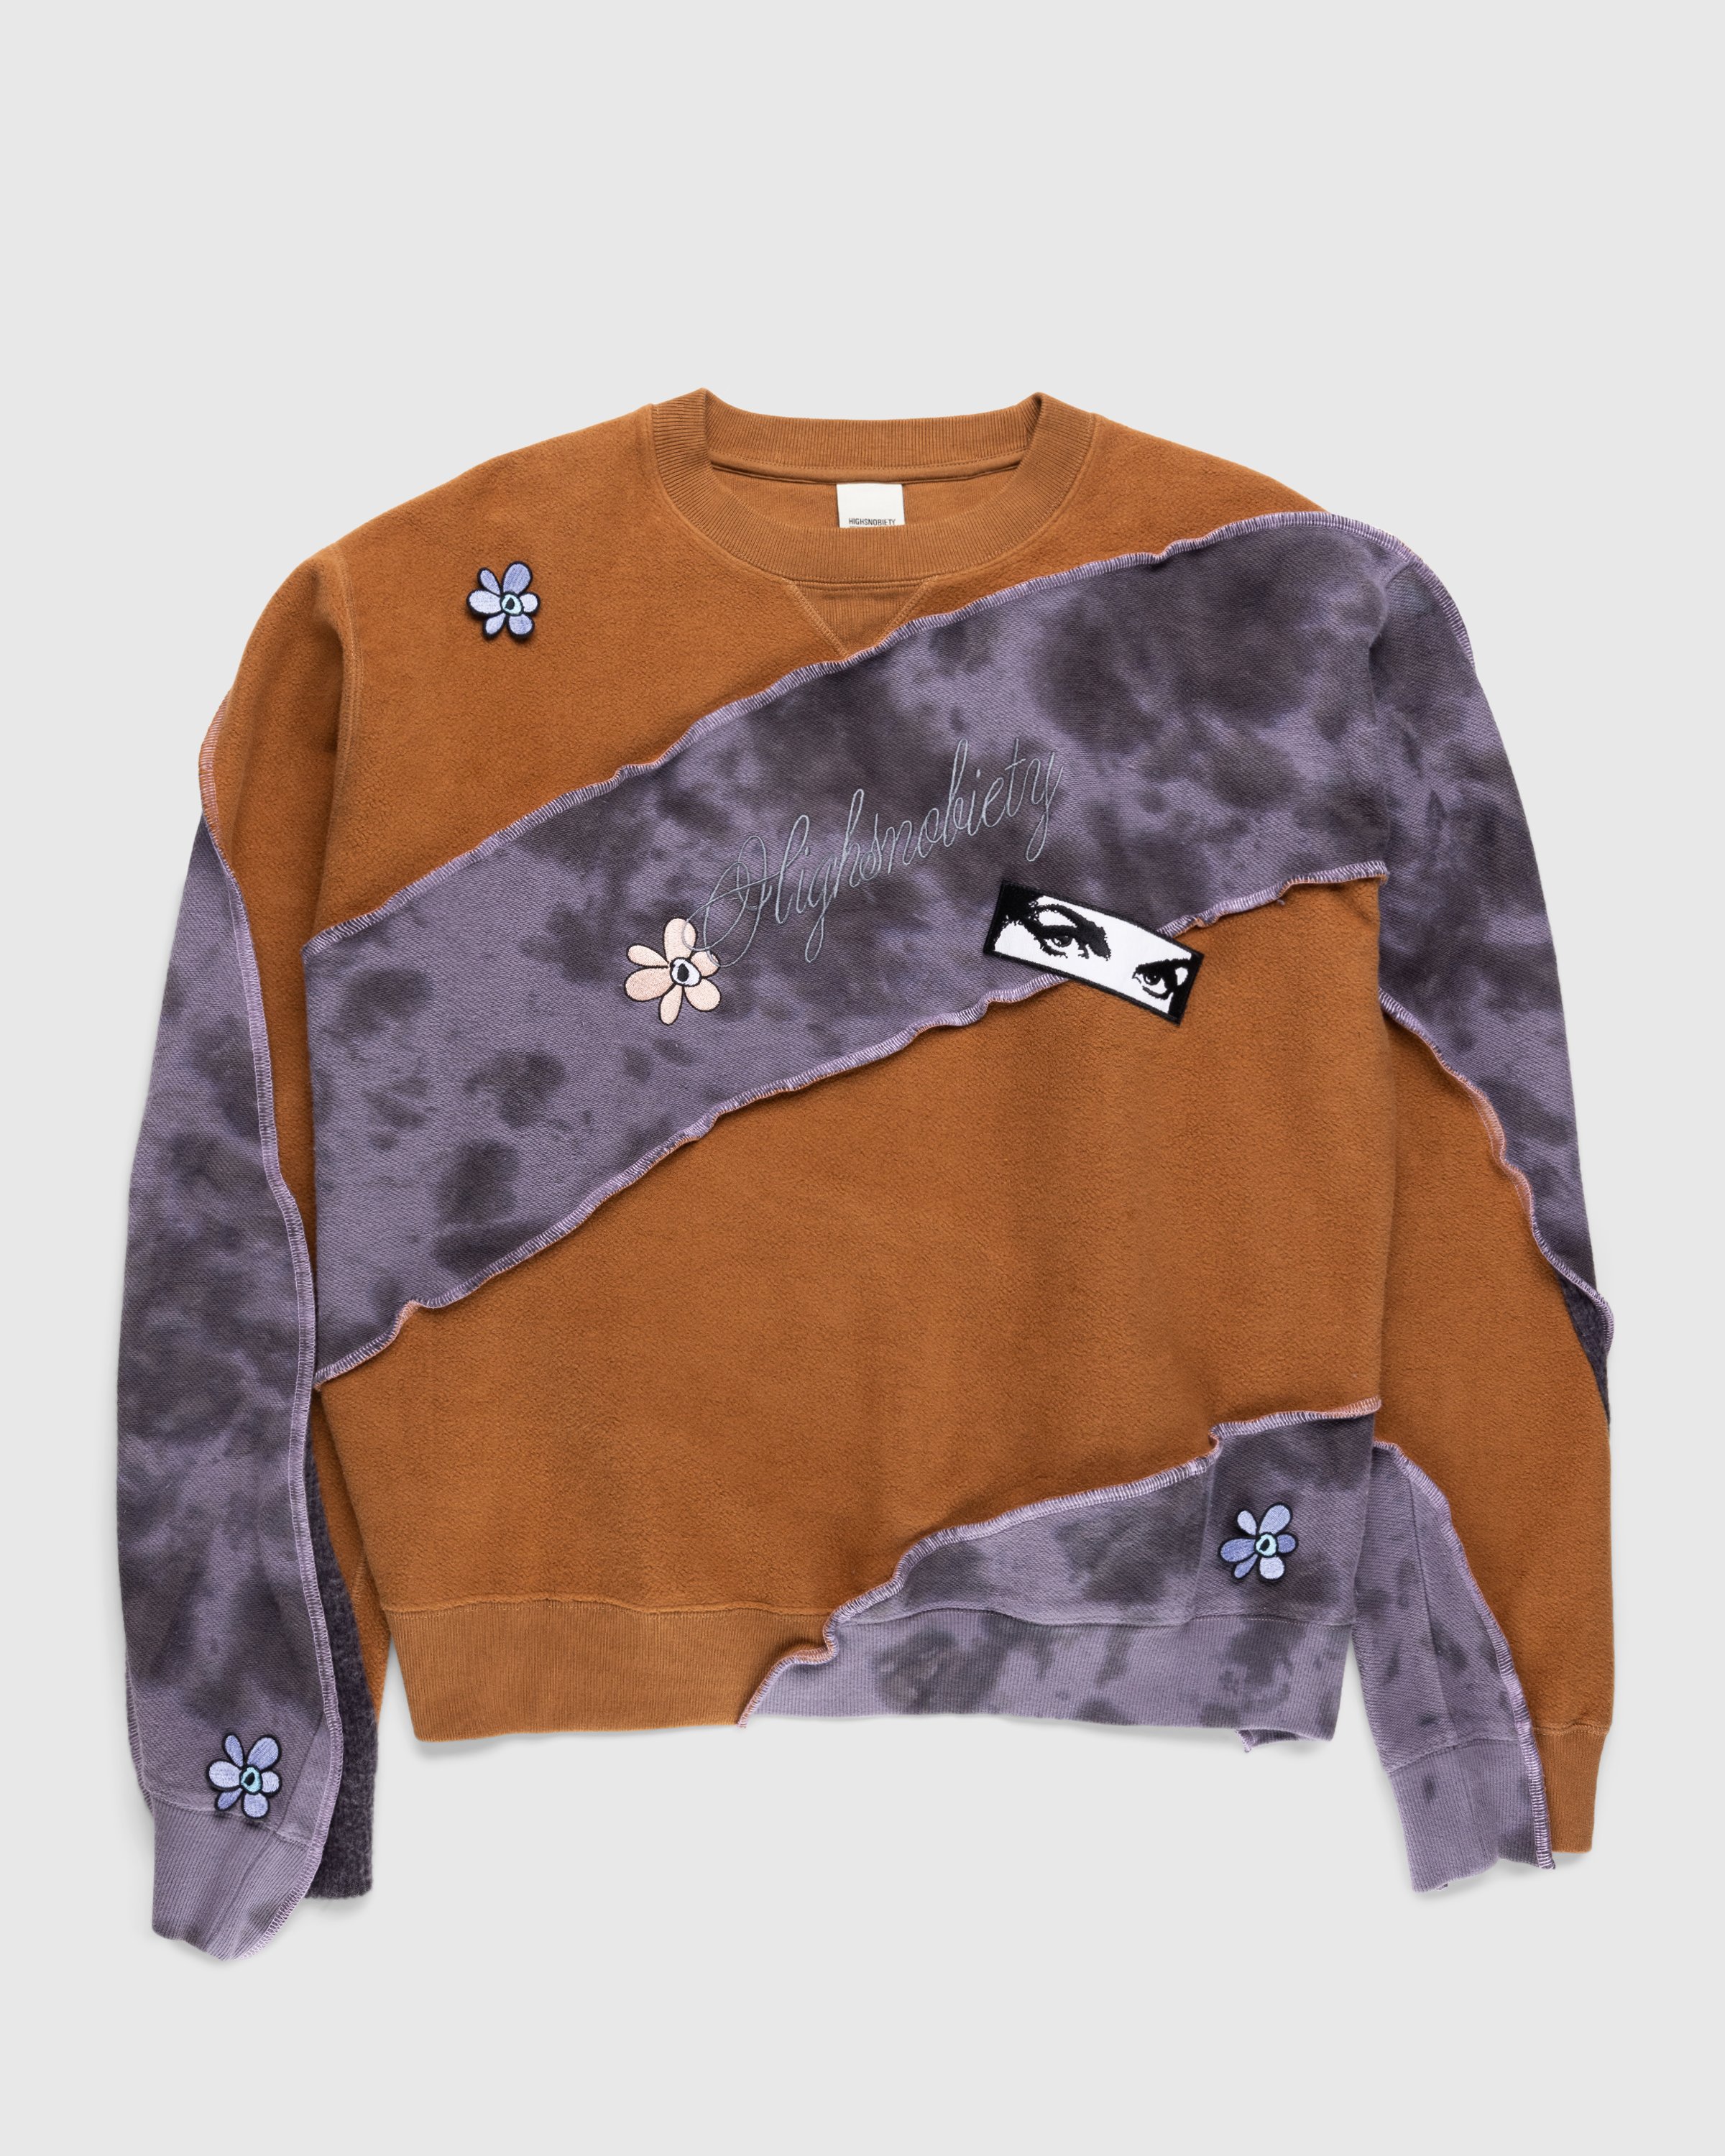 P.A.M. x Highsnobiety - Spiral Upcycle Crewneck Sweat Grey/Brown - Clothing - Multi - Image 1